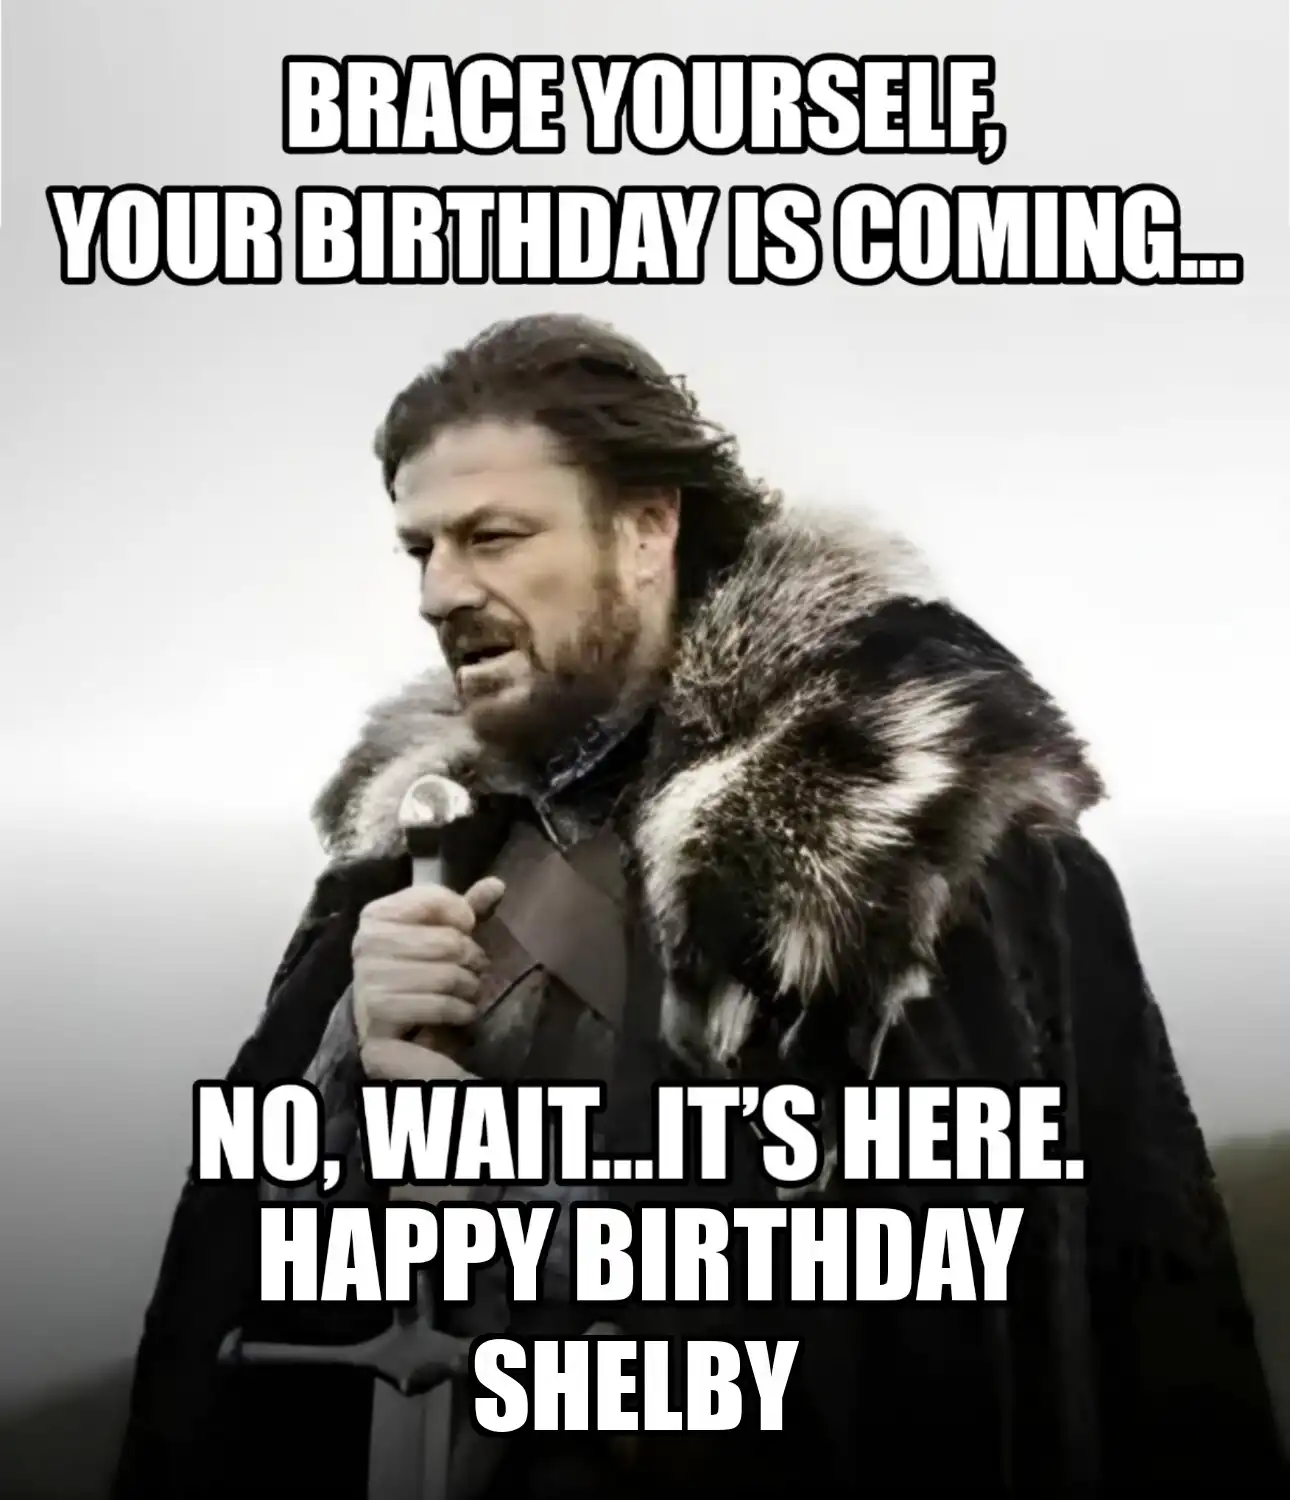 Happy Birthday Shelby Brace Yourself Your Birthday Is Coming Meme